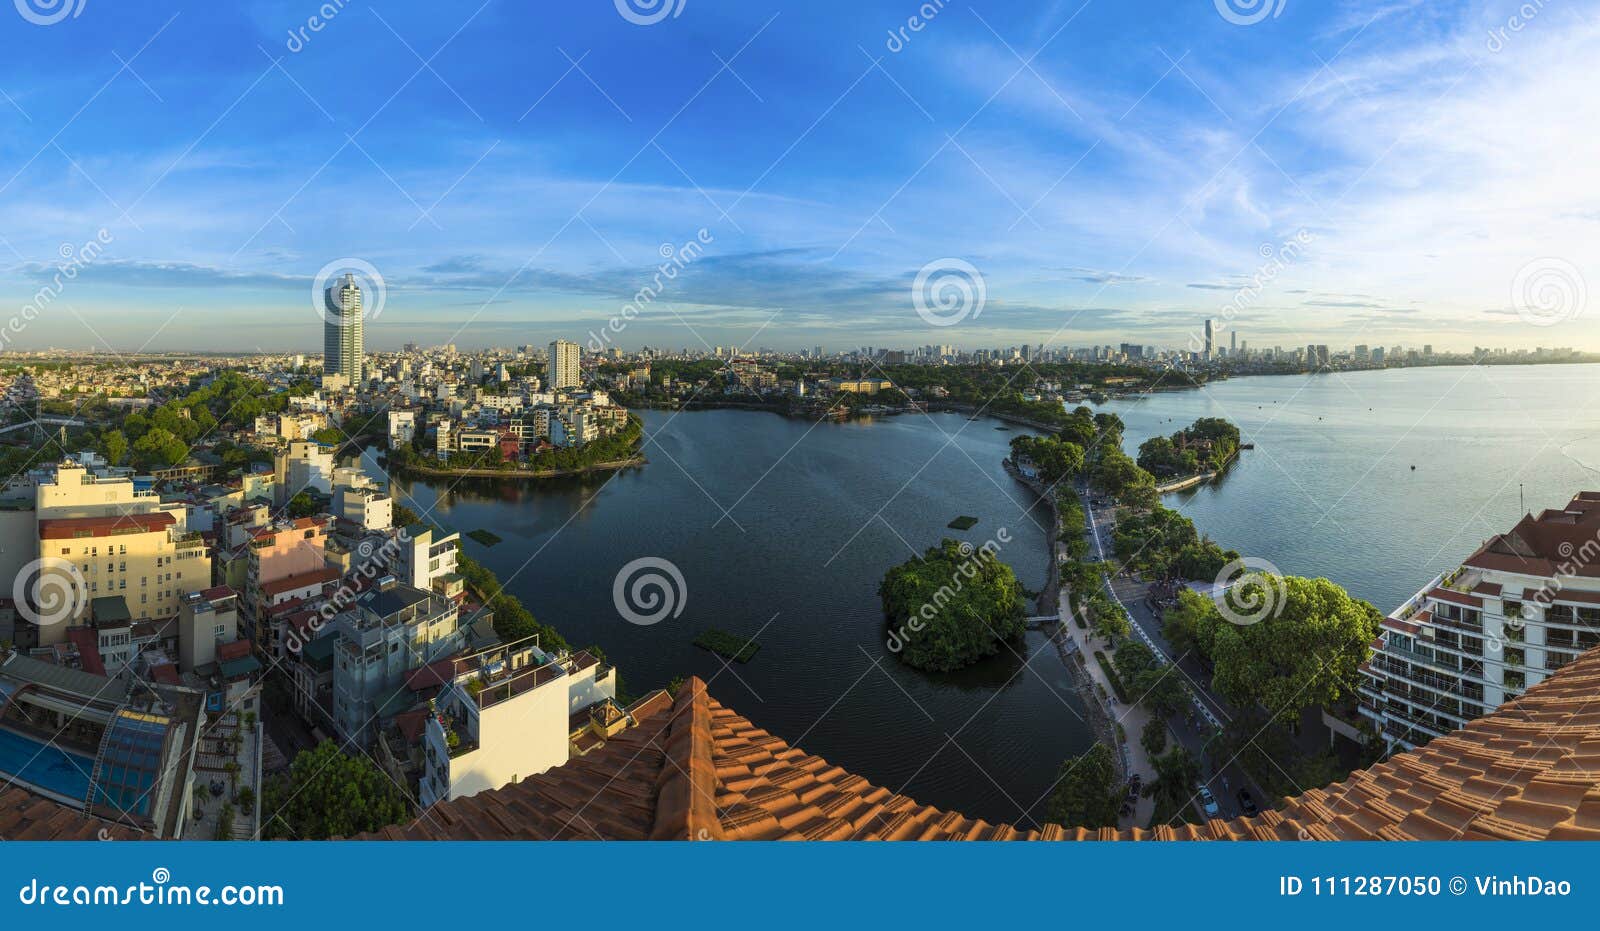 hanoi skyline cityscape at twilight period. west lake aerial view